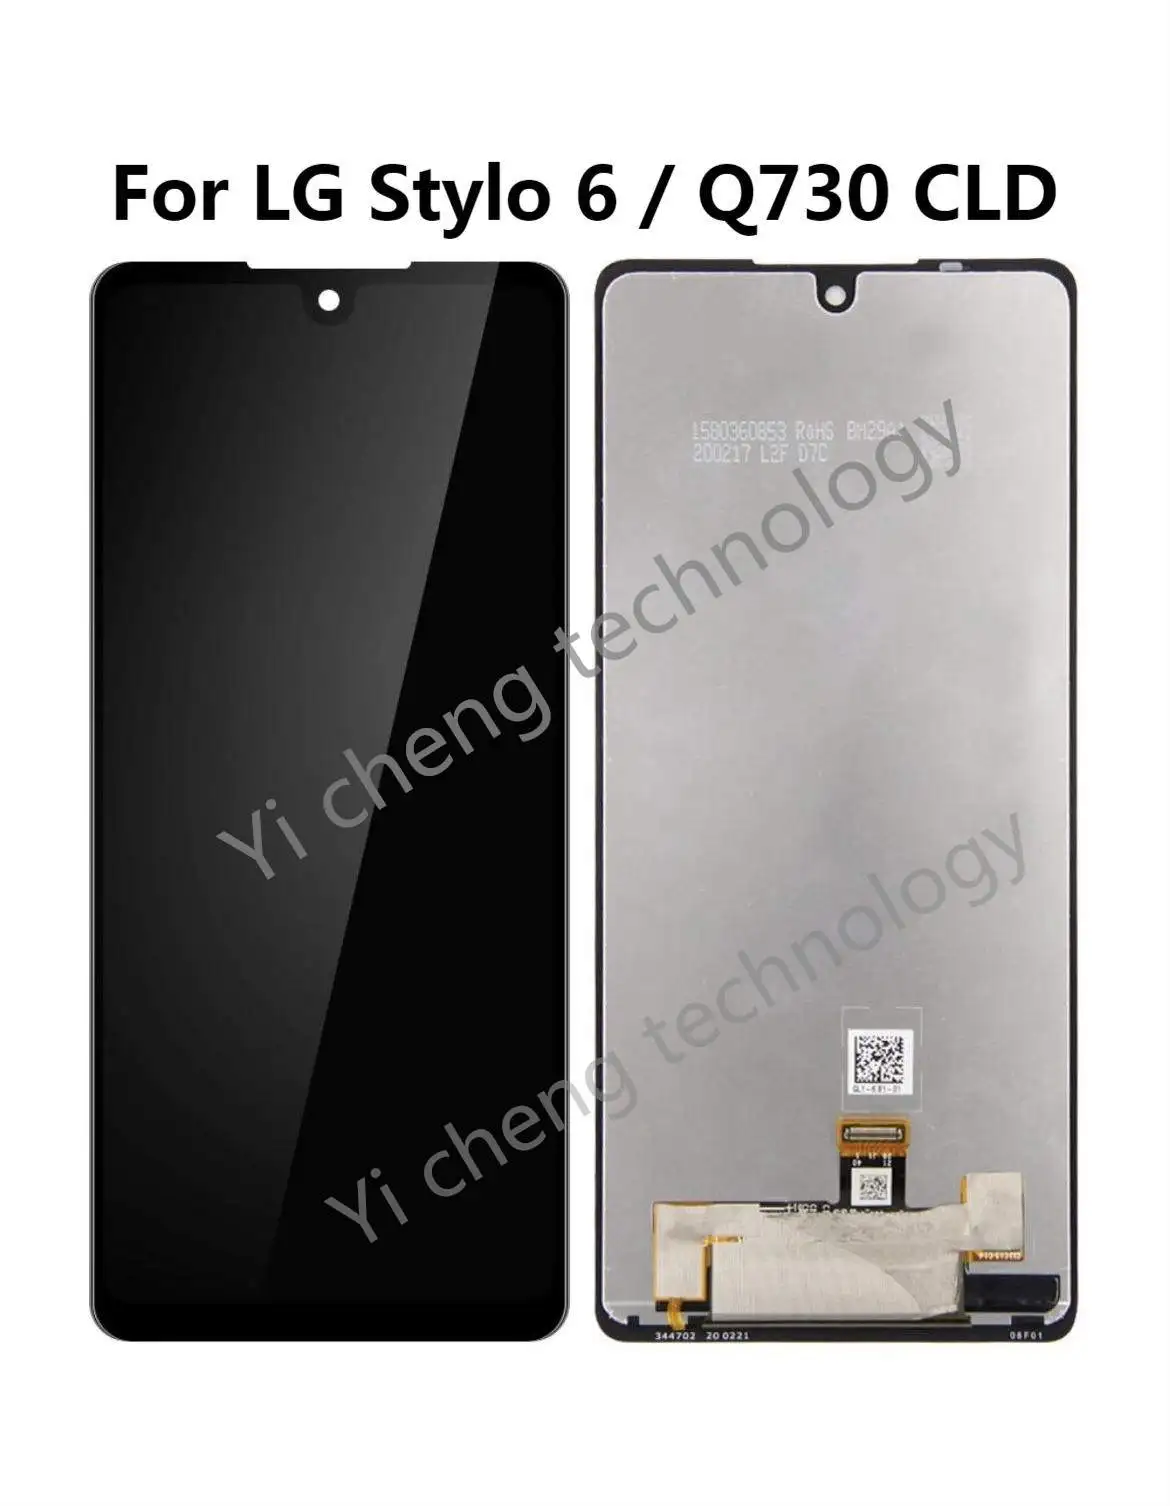 

For LG Stylo 6 Q730 LCD Display Touch Screen Digitizer Assembly For LG LM-Q730TM lcd Replacement Accessory For LG Stylo6 lcd